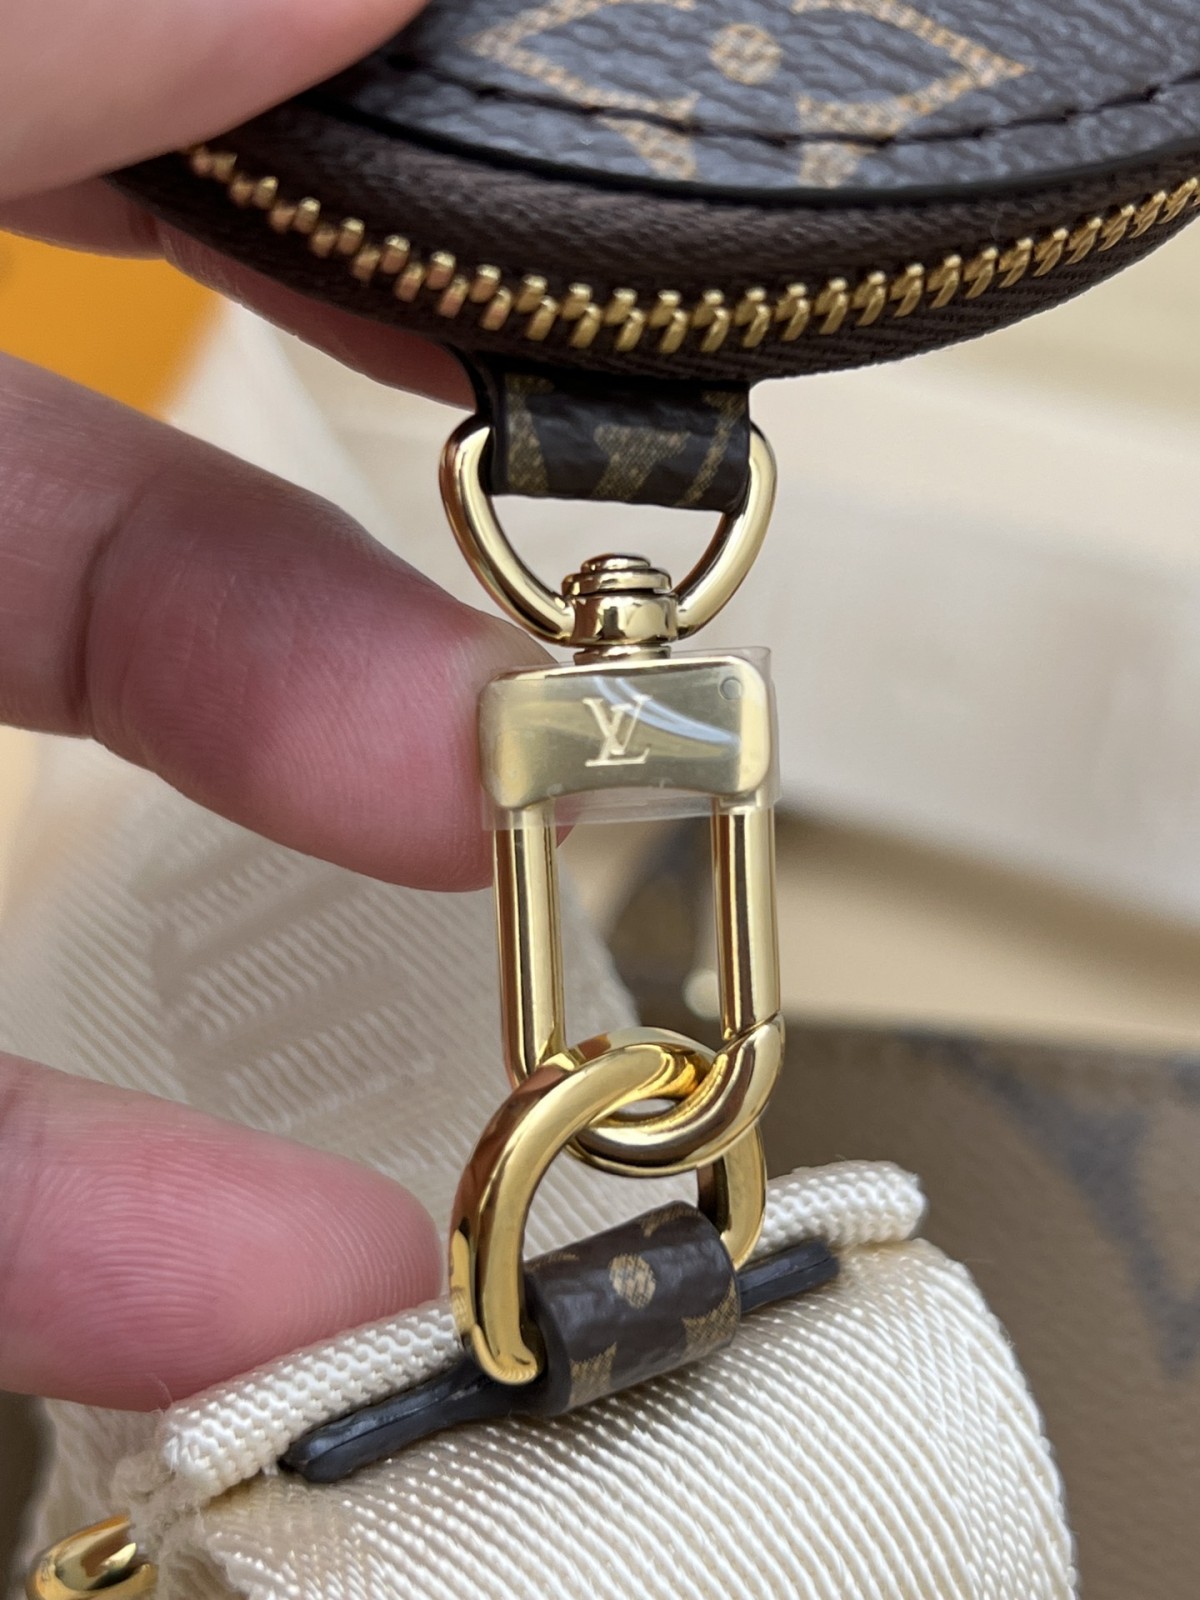 How good quality is a Shebag M46373 ONTHEGO small size?(2023 style with wide shoulder straps)-بهترين معيار جي جعلي لوئس ويٽون بيگ آن لائين اسٽور، ريپليڪا ڊيزائنر بيگ ru